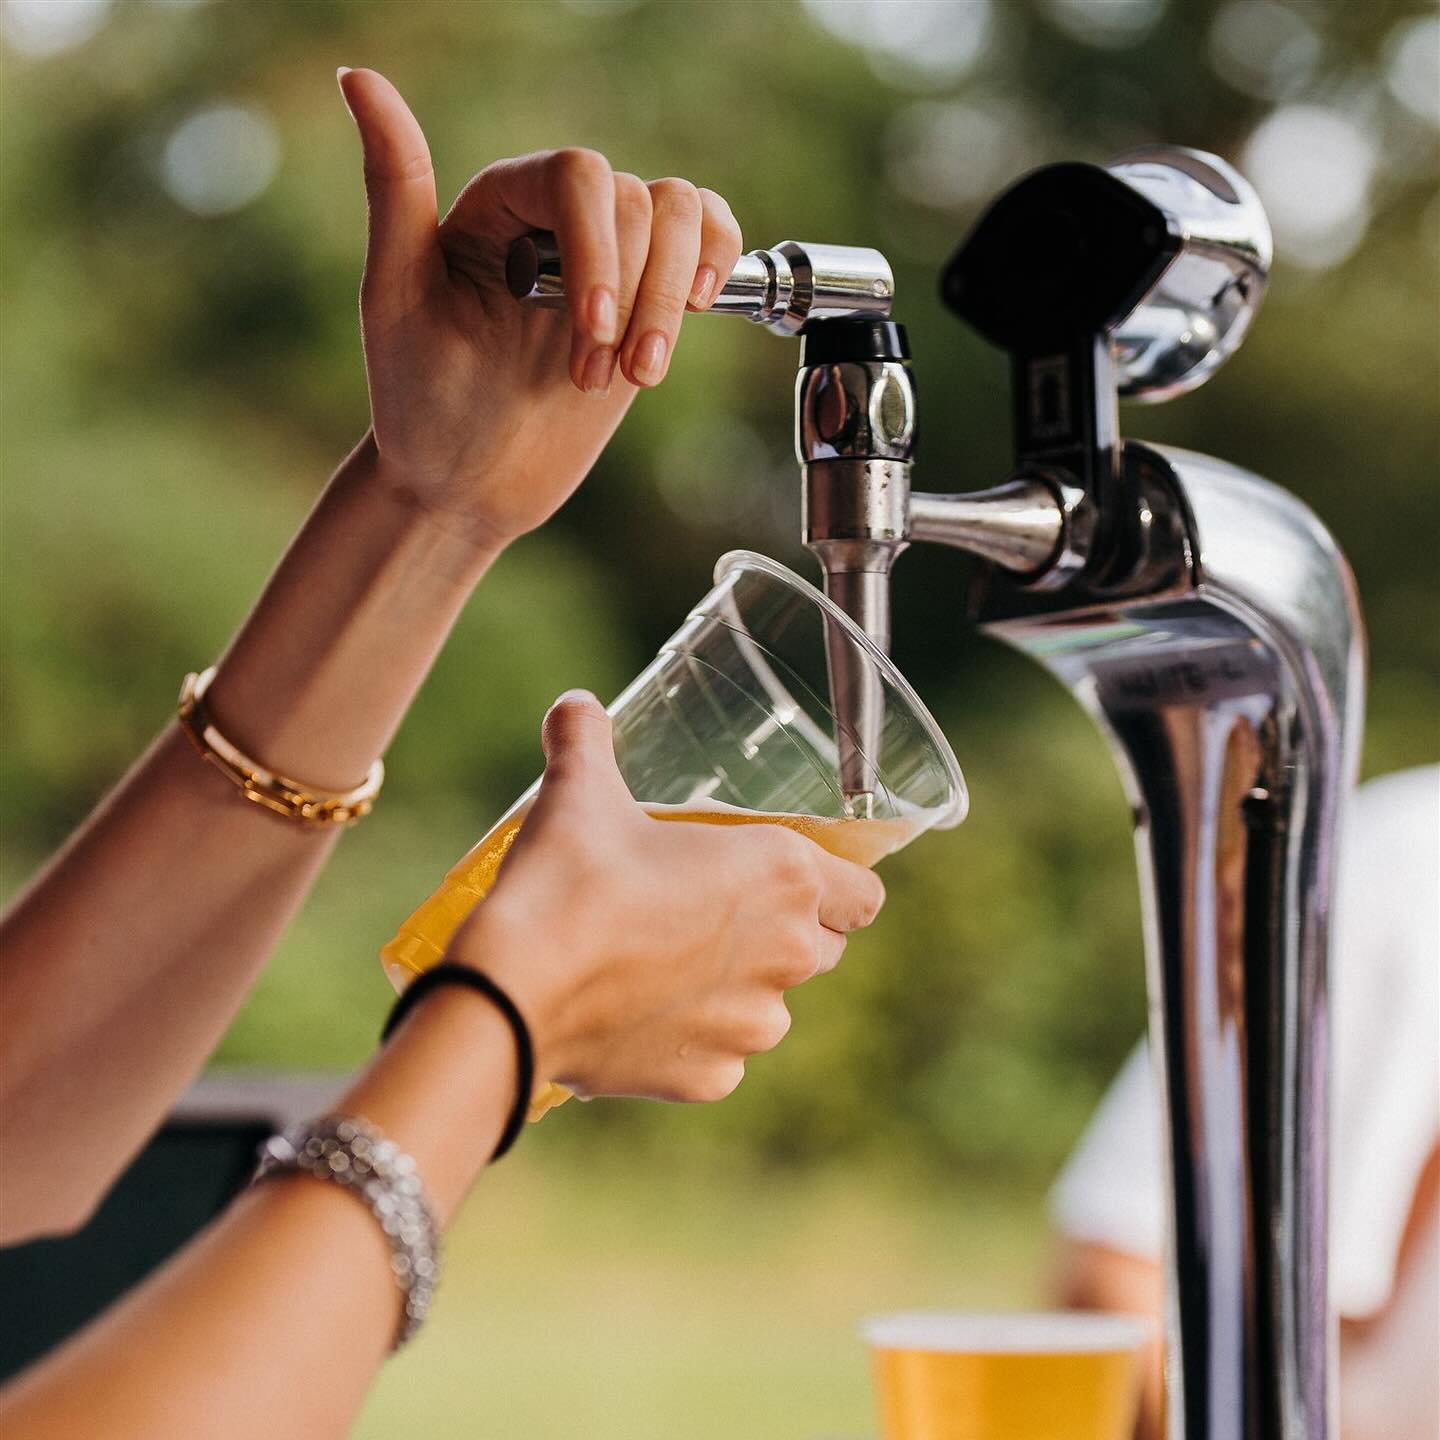 Pour a good pint? 🍻

We&rsquo;re looking for newbies to JOIN OUR TEAM behind the famous umbrella bar in Battersea Park this summer 😎

If you know your way around a bar and would like to spend your summer alongside our EPIC Pear Tree team, 
send you